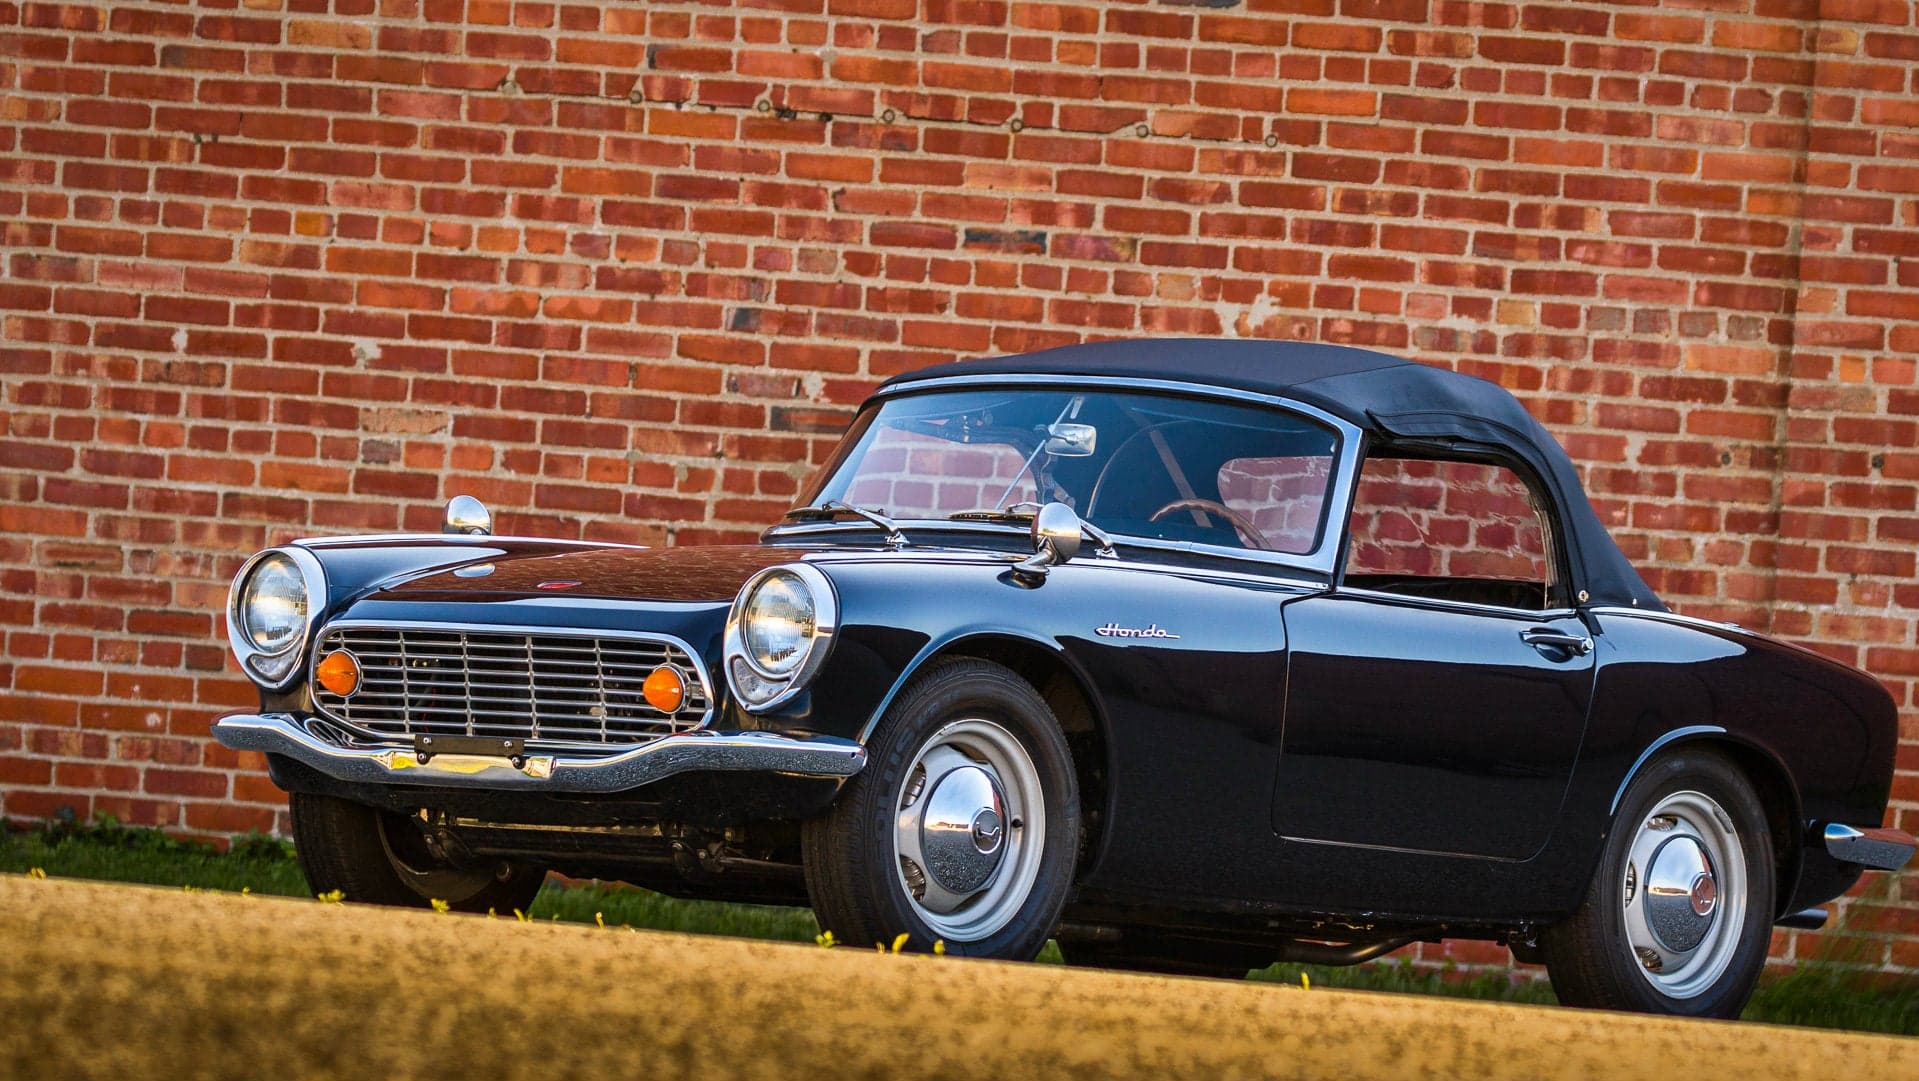 For Sale: Mint Honda S600 With 40,000 Miles